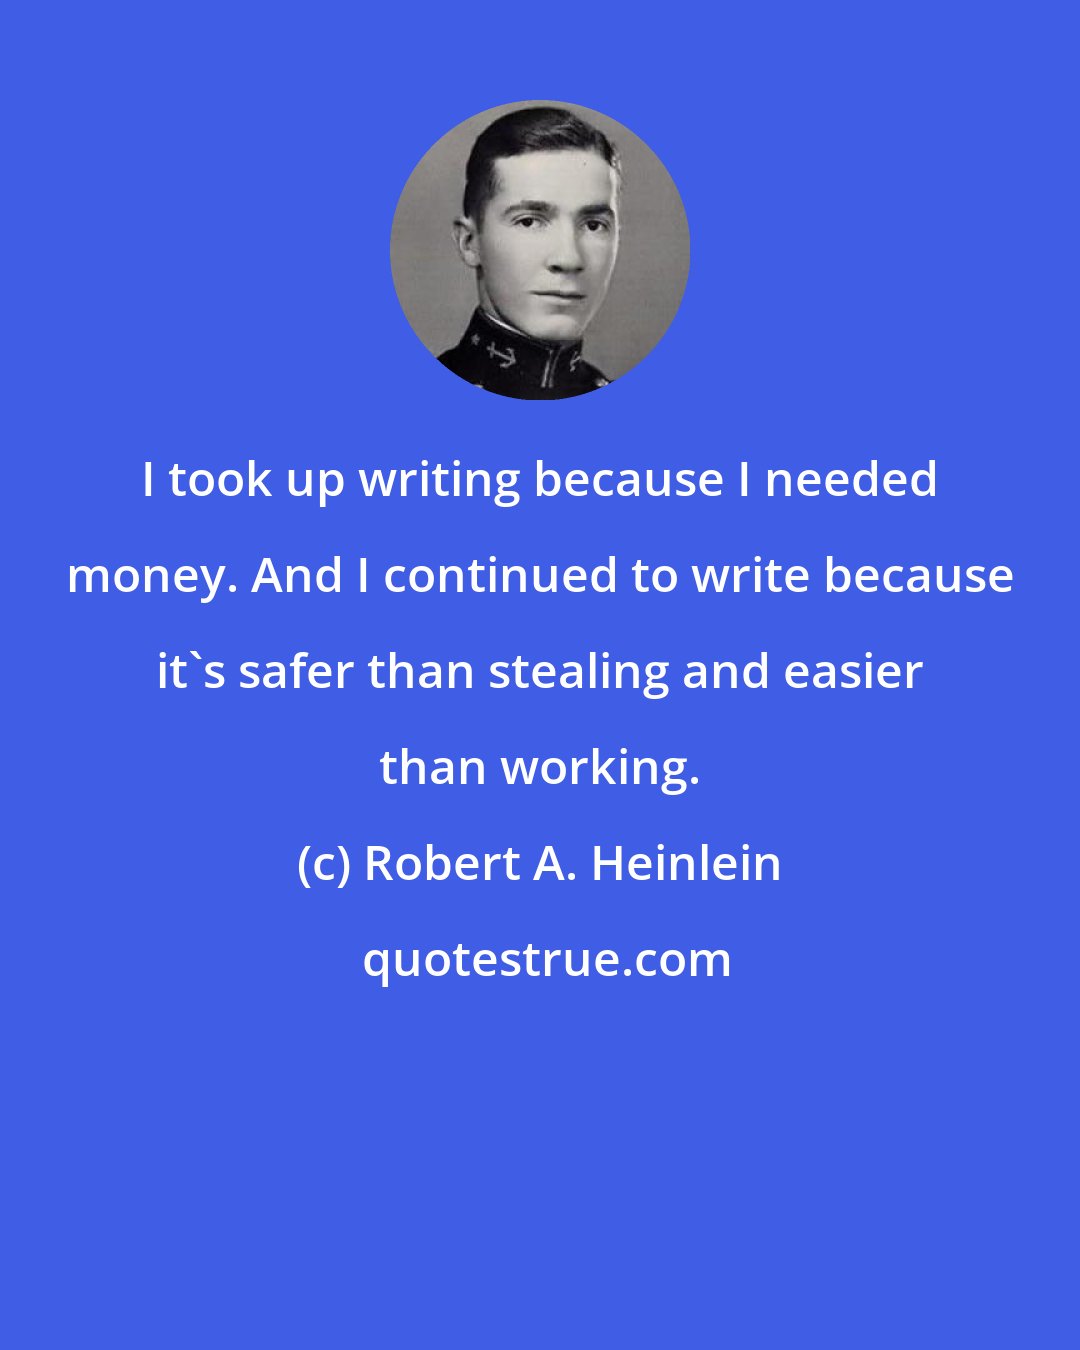 Robert A. Heinlein: I took up writing because I needed money. And I continued to write because it's safer than stealing and easier than working.